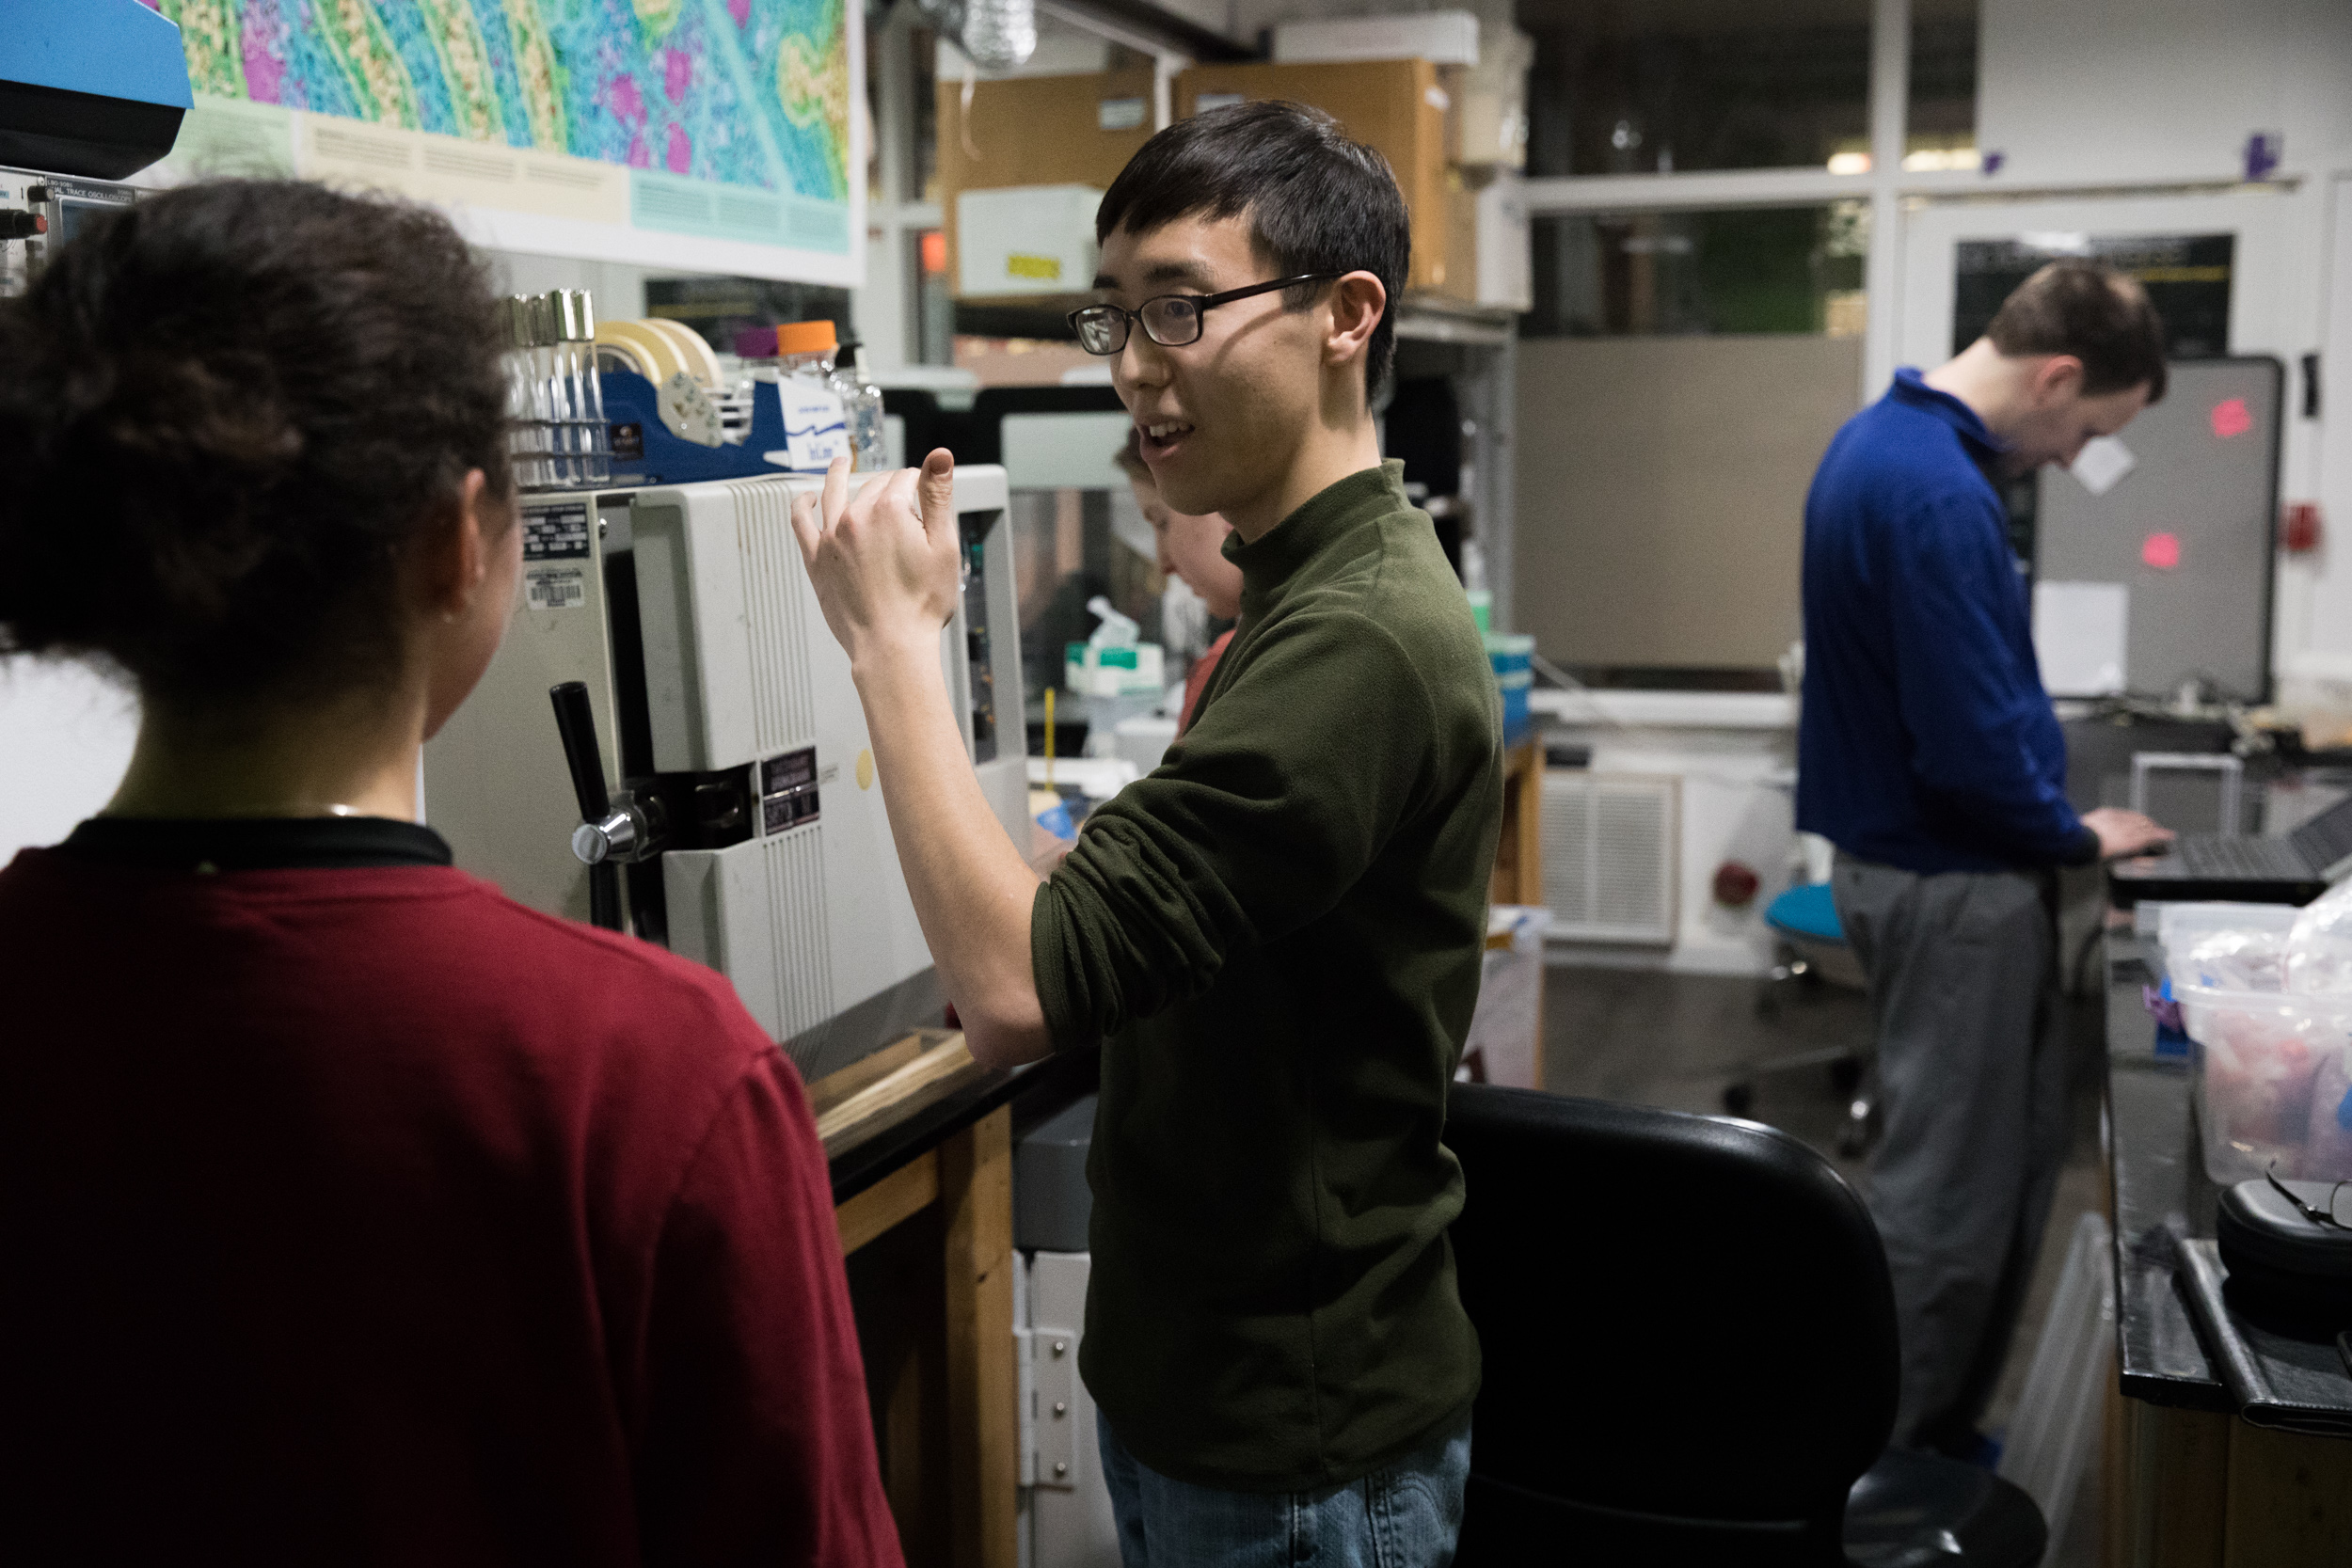 Yoshi Goto speaks with high school student Sienna Patton during a group meeting at Sound Bio Lab in Seattle's University District.